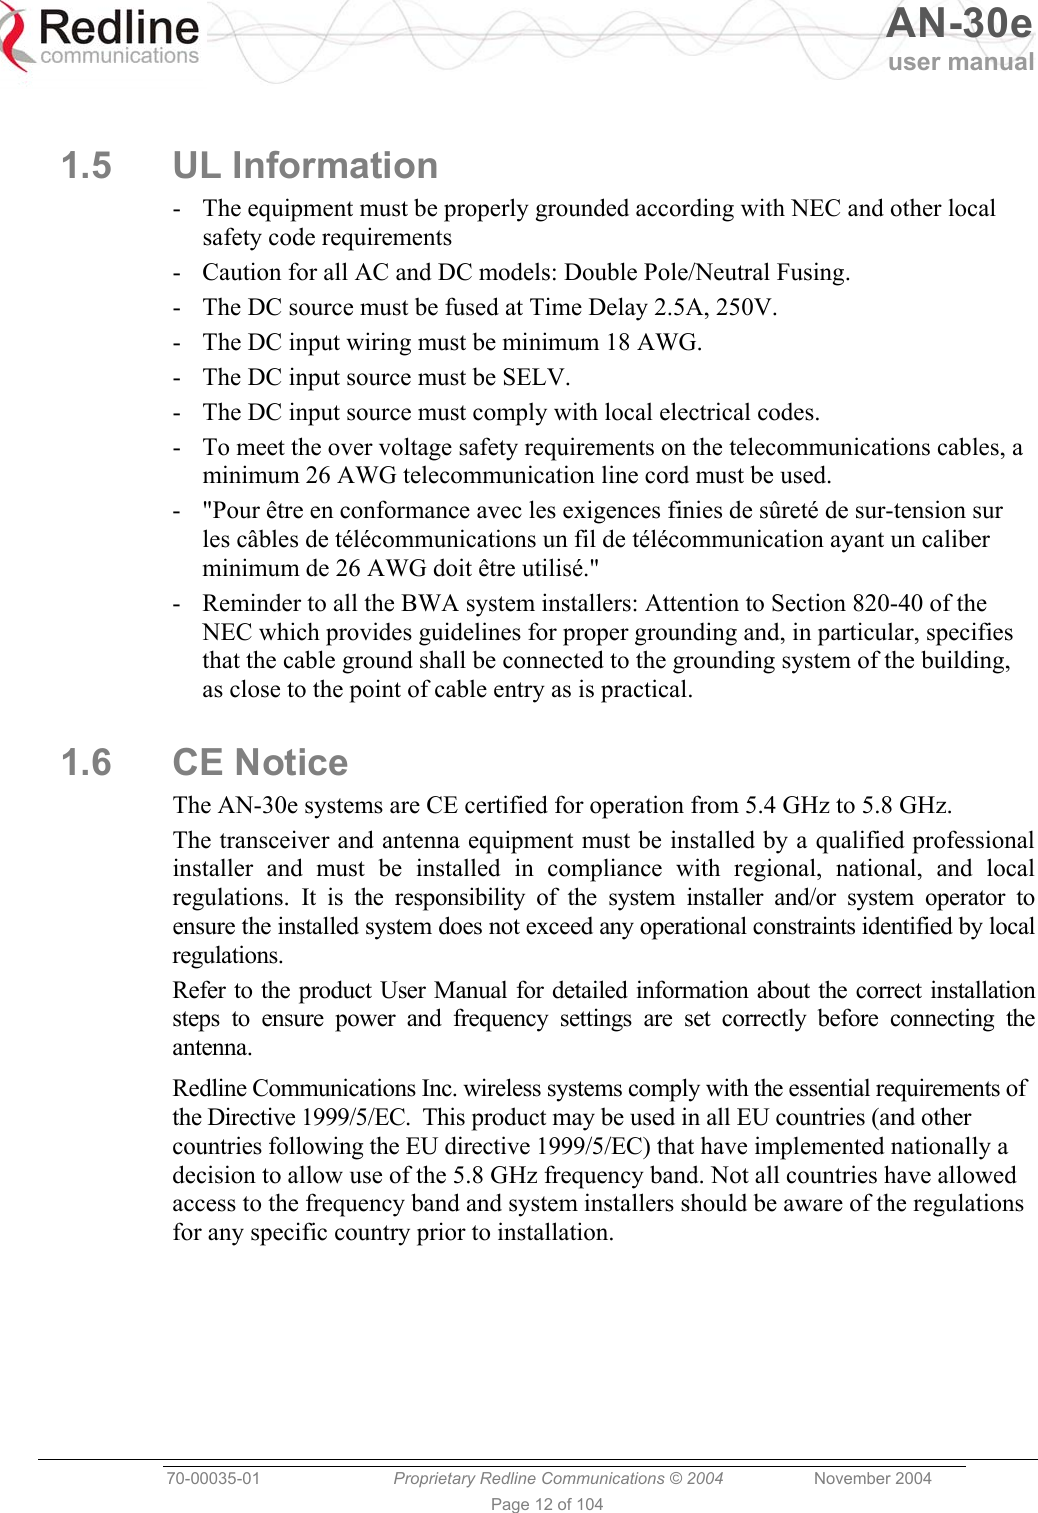   AN-30e user manual  70-00035-01  Proprietary Redline Communications © 2004 November 2004   Page 12 of 104  1.5 UL Information -  The equipment must be properly grounded according with NEC and other local safety code requirements -  Caution for all AC and DC models: Double Pole/Neutral Fusing. -  The DC source must be fused at Time Delay 2.5A, 250V. -  The DC input wiring must be minimum 18 AWG. -  The DC input source must be SELV. -  The DC input source must comply with local electrical codes. -  To meet the over voltage safety requirements on the telecommunications cables, a minimum 26 AWG telecommunication line cord must be used. -  &quot;Pour être en conformance avec les exigences finies de sûreté de sur-tension sur les câbles de télécommunications un fil de télécommunication ayant un caliber minimum de 26 AWG doit être utilisé.&quot; -  Reminder to all the BWA system installers: Attention to Section 820-40 of the NEC which provides guidelines for proper grounding and, in particular, specifies that the cable ground shall be connected to the grounding system of the building, as close to the point of cable entry as is practical. 1.6 CE Notice The AN-30e systems are CE certified for operation from 5.4 GHz to 5.8 GHz. The transceiver and antenna equipment must be installed by a qualified professional installer and must be installed in compliance with regional, national, and local regulations. It is the responsibility of the system installer and/or system operator to ensure the installed system does not exceed any operational constraints identified by local regulations.  Refer to the product User Manual for detailed information about the correct installation steps to ensure power and frequency settings are set correctly before connecting the antenna. Redline Communications Inc. wireless systems comply with the essential requirements of the Directive 1999/5/EC.  This product may be used in all EU countries (and other countries following the EU directive 1999/5/EC) that have implemented nationally a decision to allow use of the 5.8 GHz frequency band. Not all countries have allowed access to the frequency band and system installers should be aware of the regulations for any specific country prior to installation. 